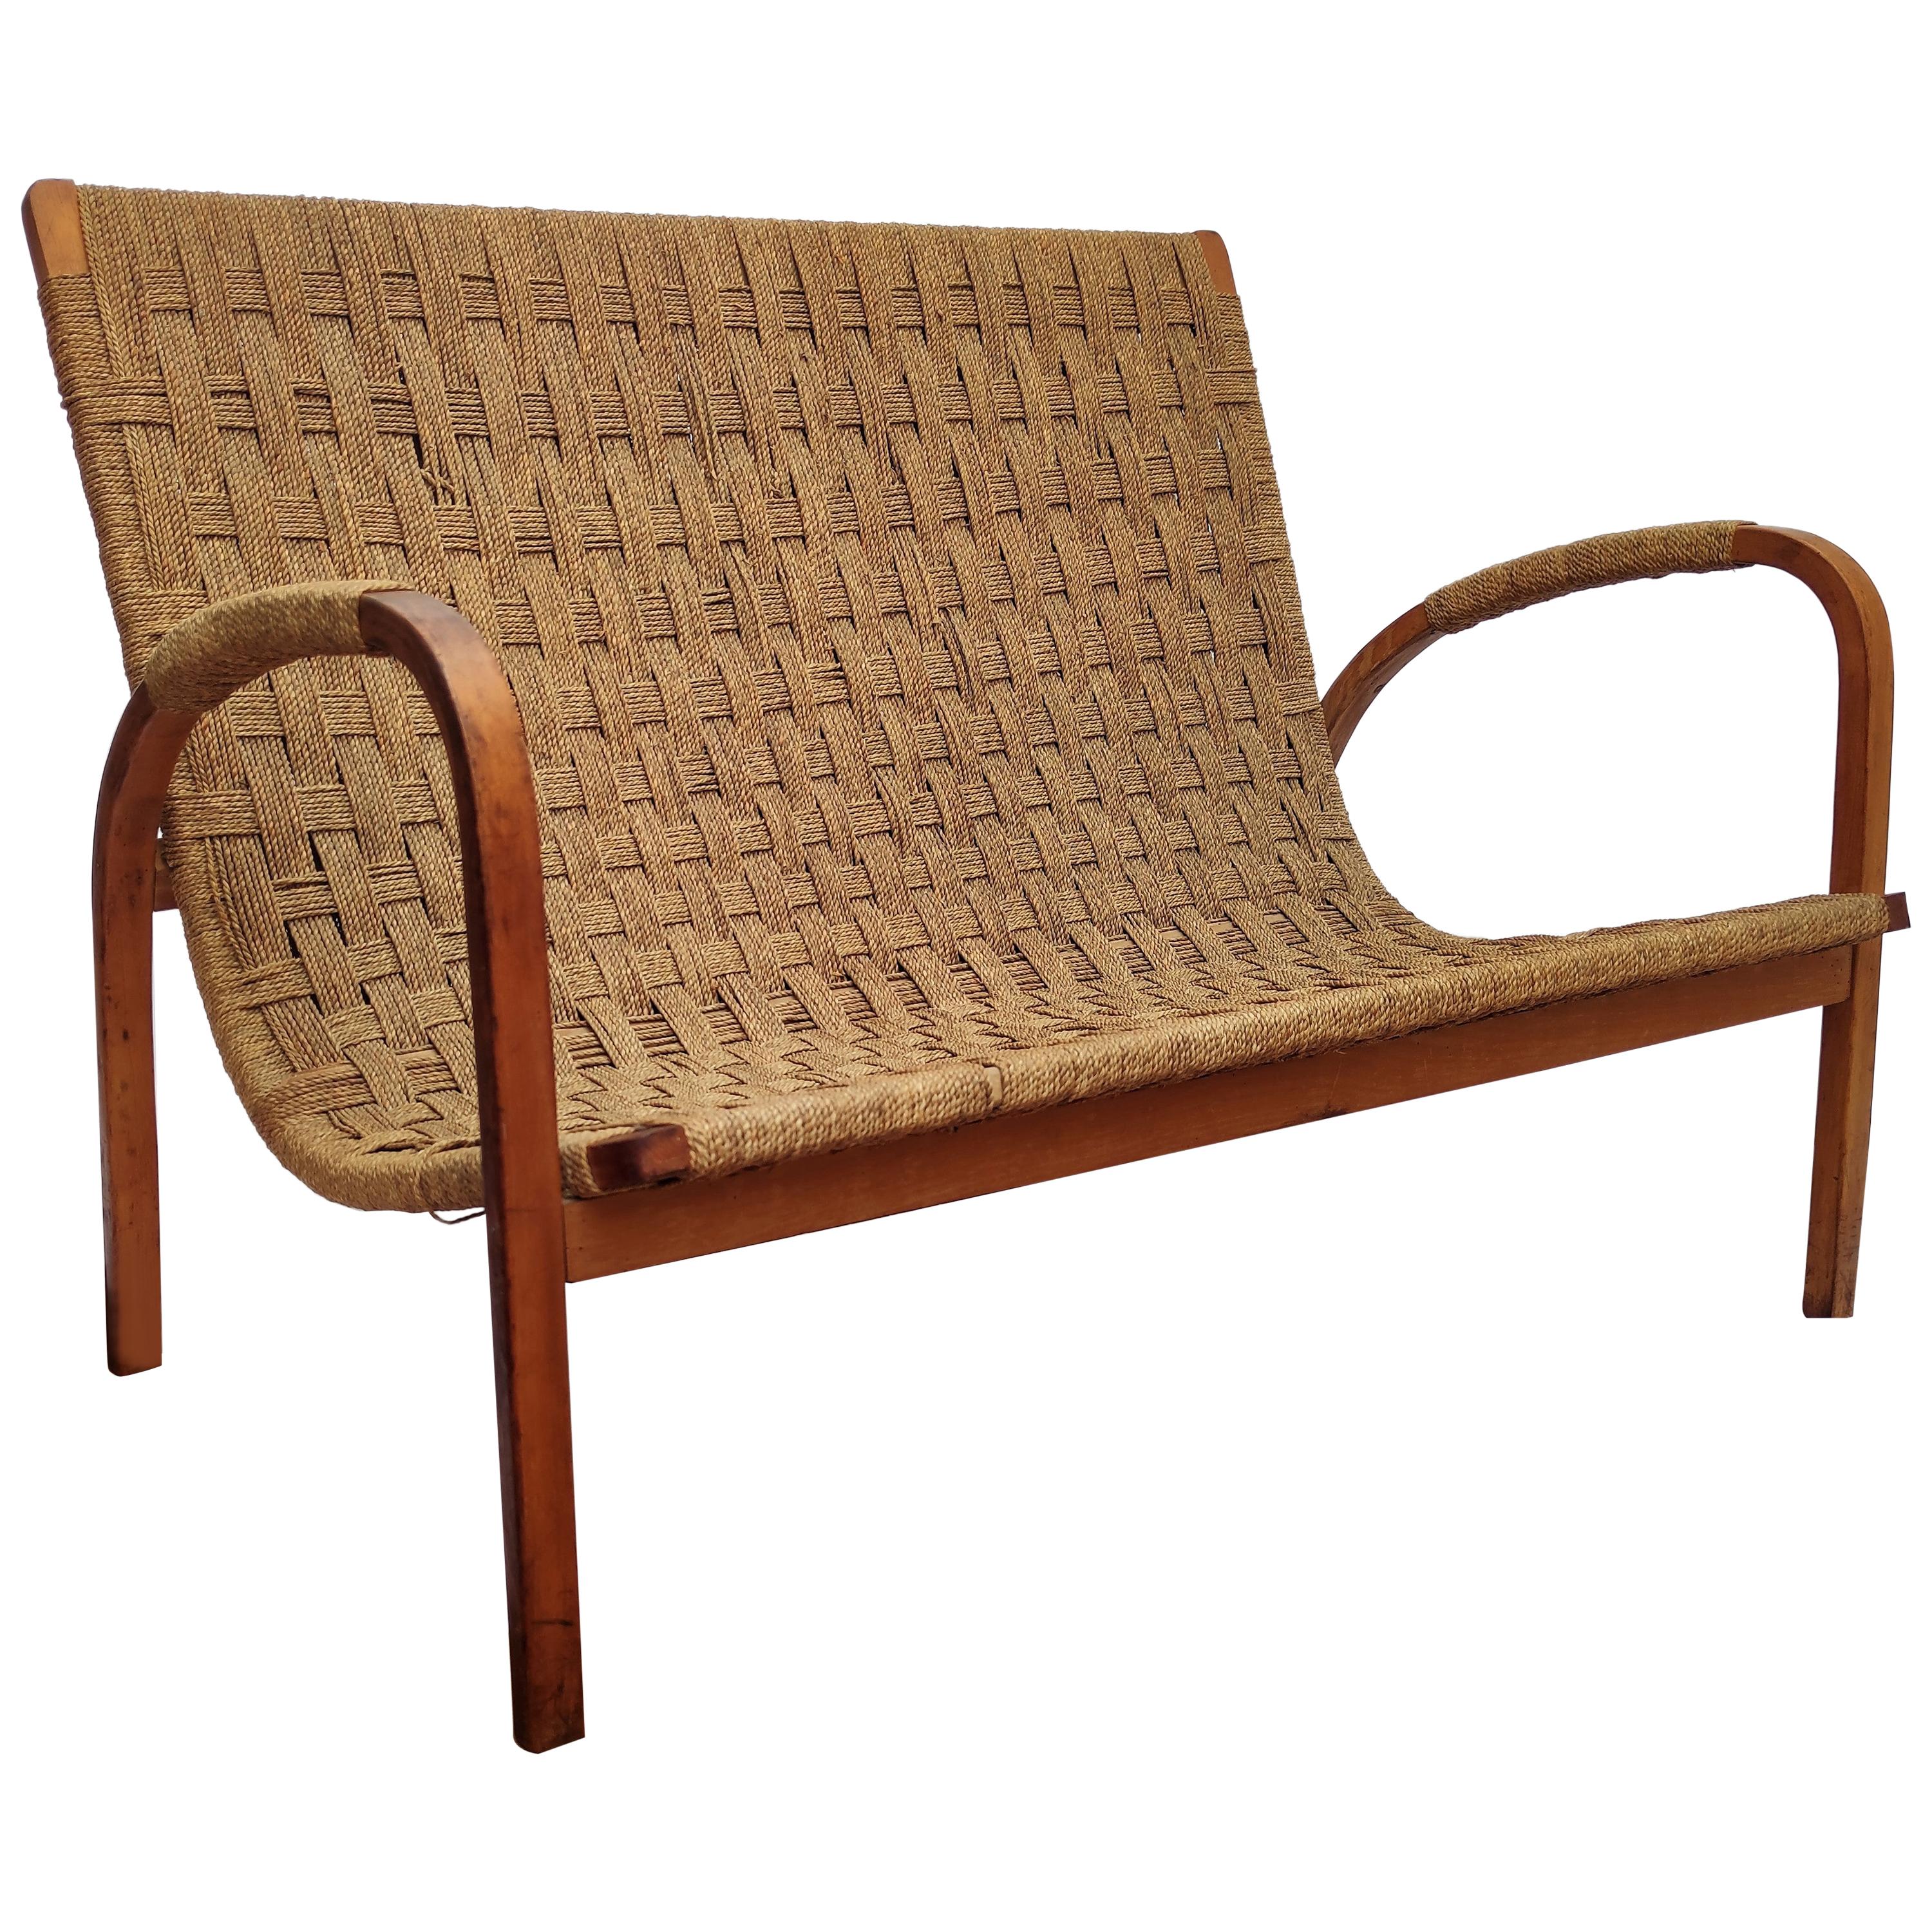 1960s Italian Midcentury Wood and Cord Woven Rope Lounge Bench Armchair